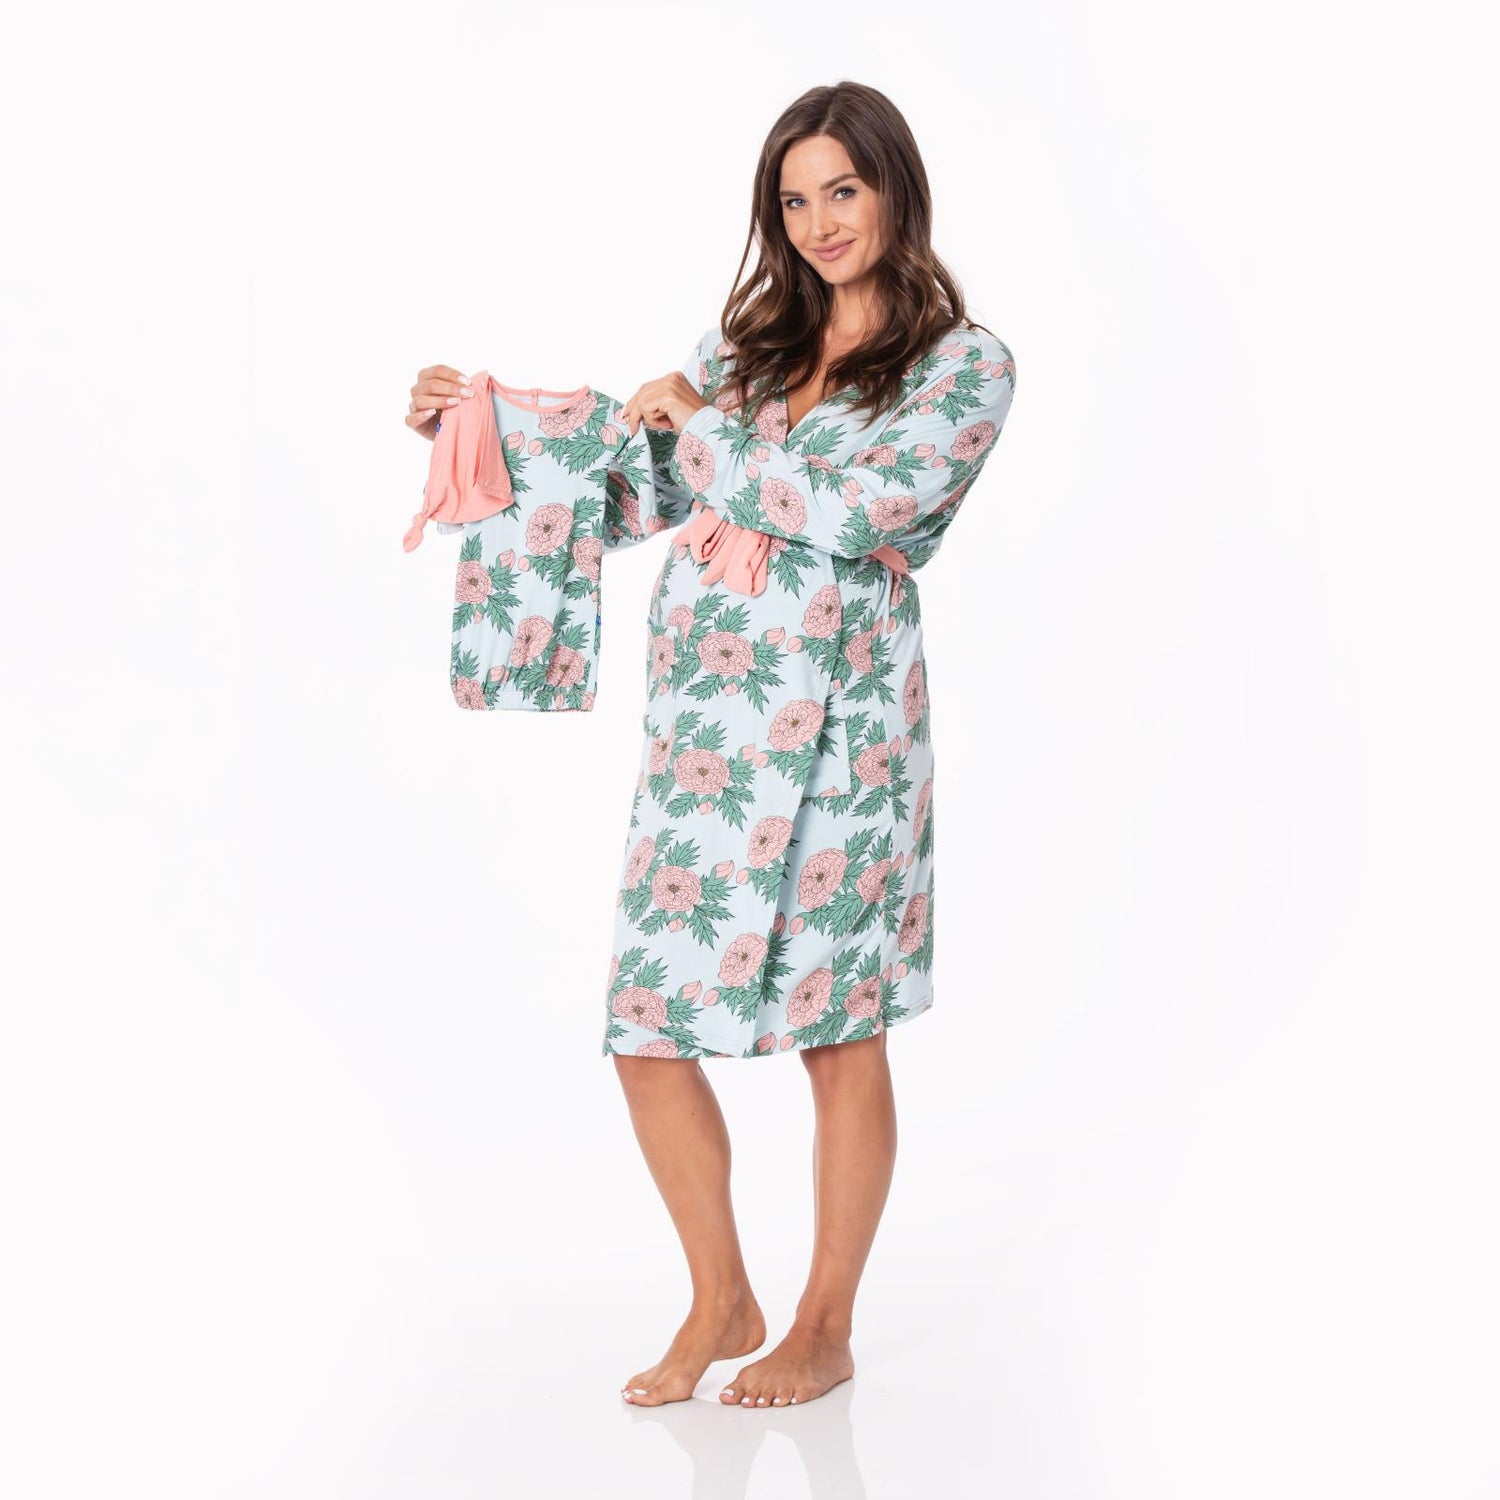 Women's Maternity/Nursing Robe & Layette Gown Set in Spring Sky Floral